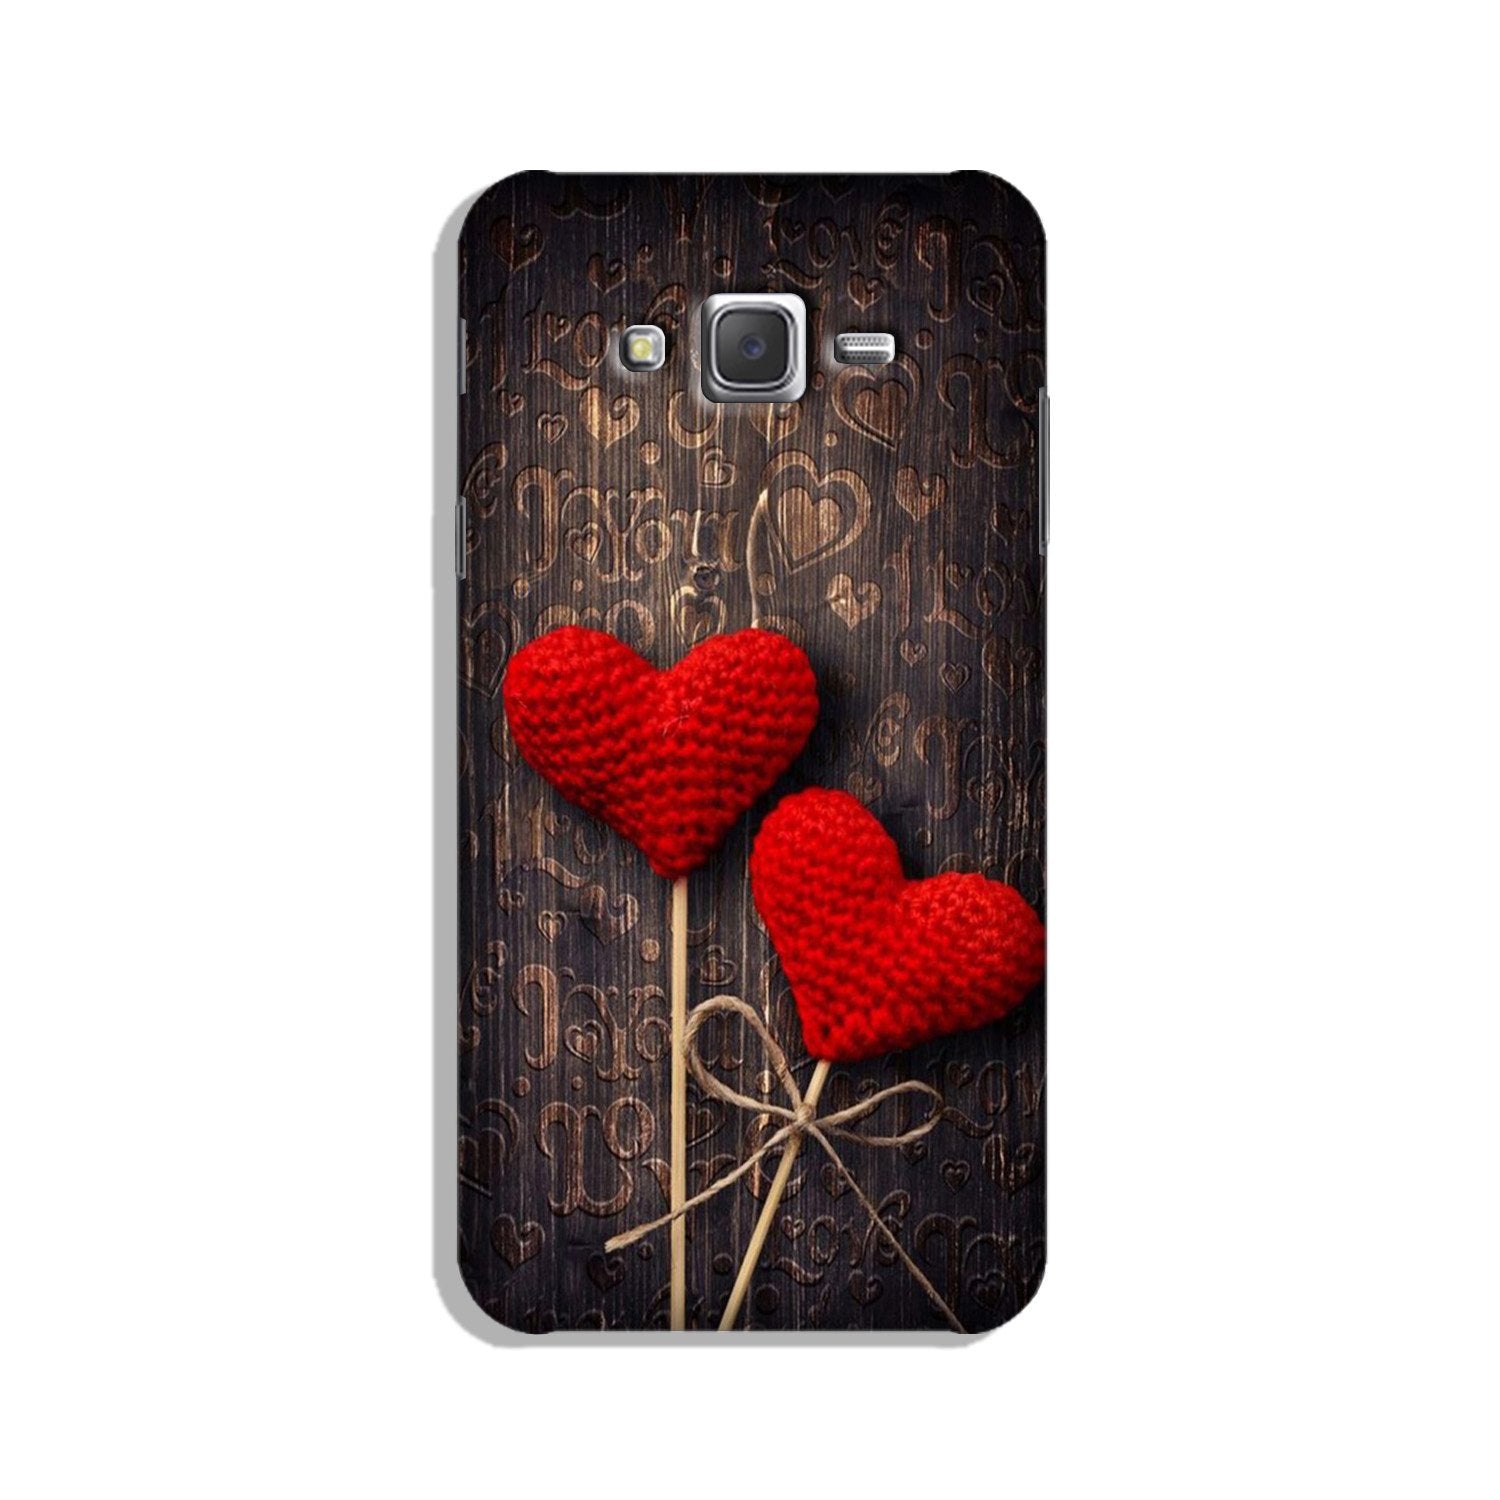 Red Hearts Case for Galaxy J5 (2015)